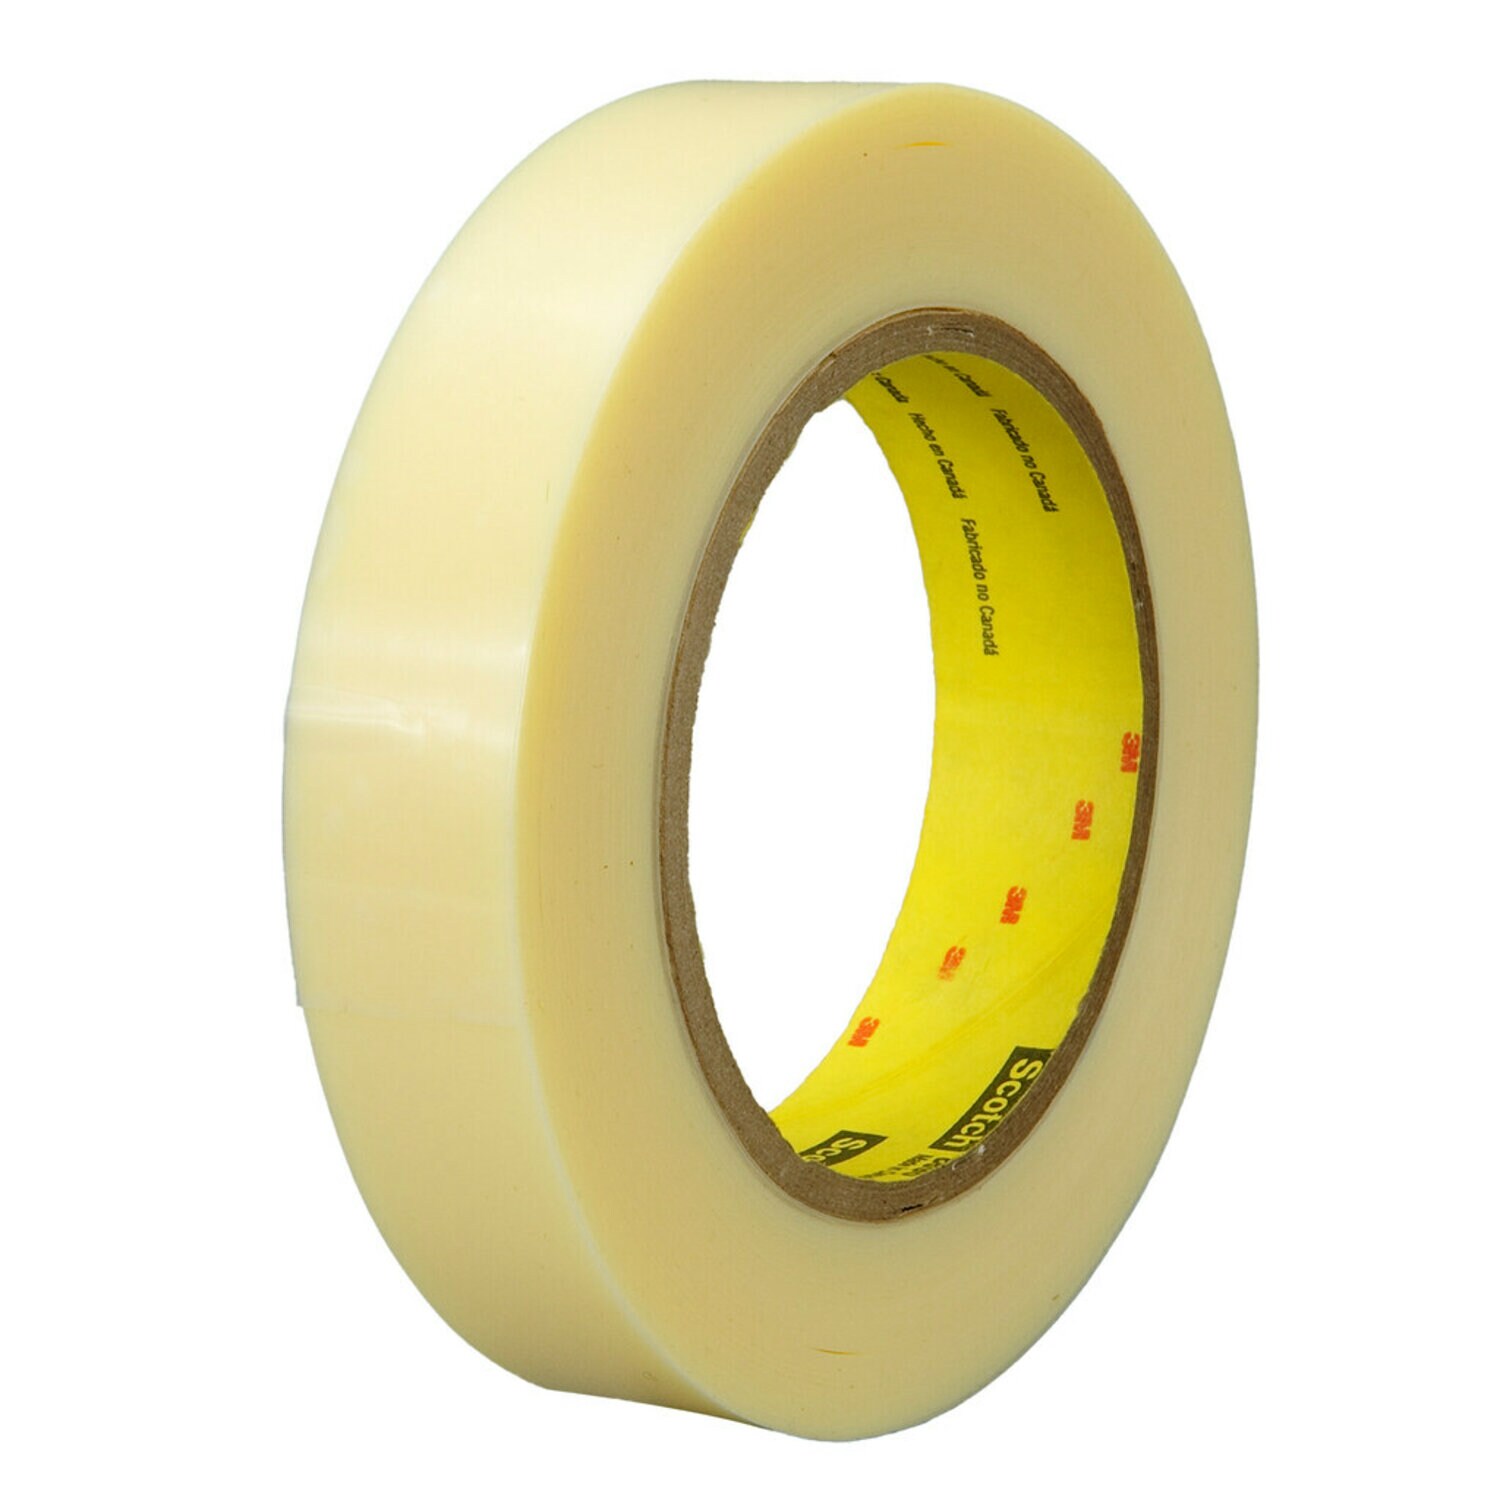 7000123951 - Scotch Strapping Tape 8898, Ivory, 18 mm x 55 m, 4.6 mil, 48 rolls per
case